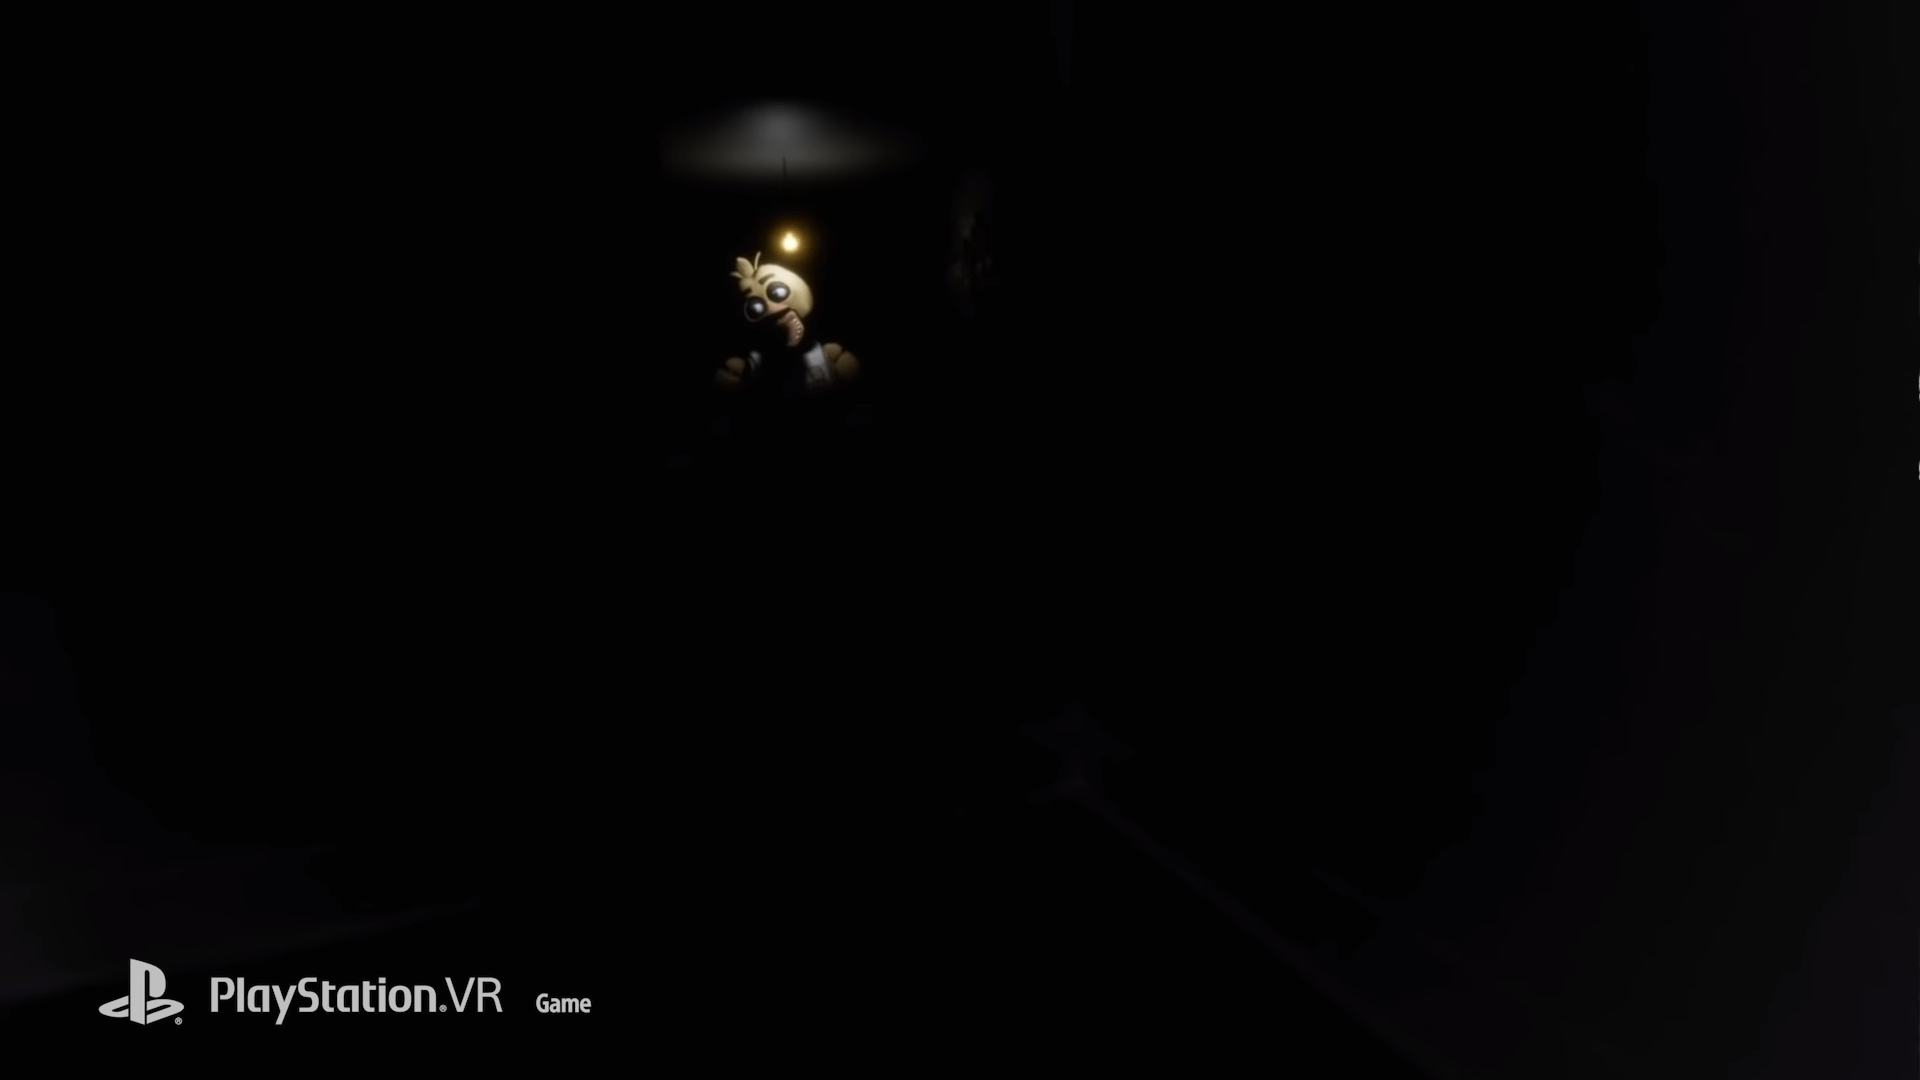 Five Nights At Freddy’s: Help Wanted Has Updated, Removing The VR Requirement For Playing